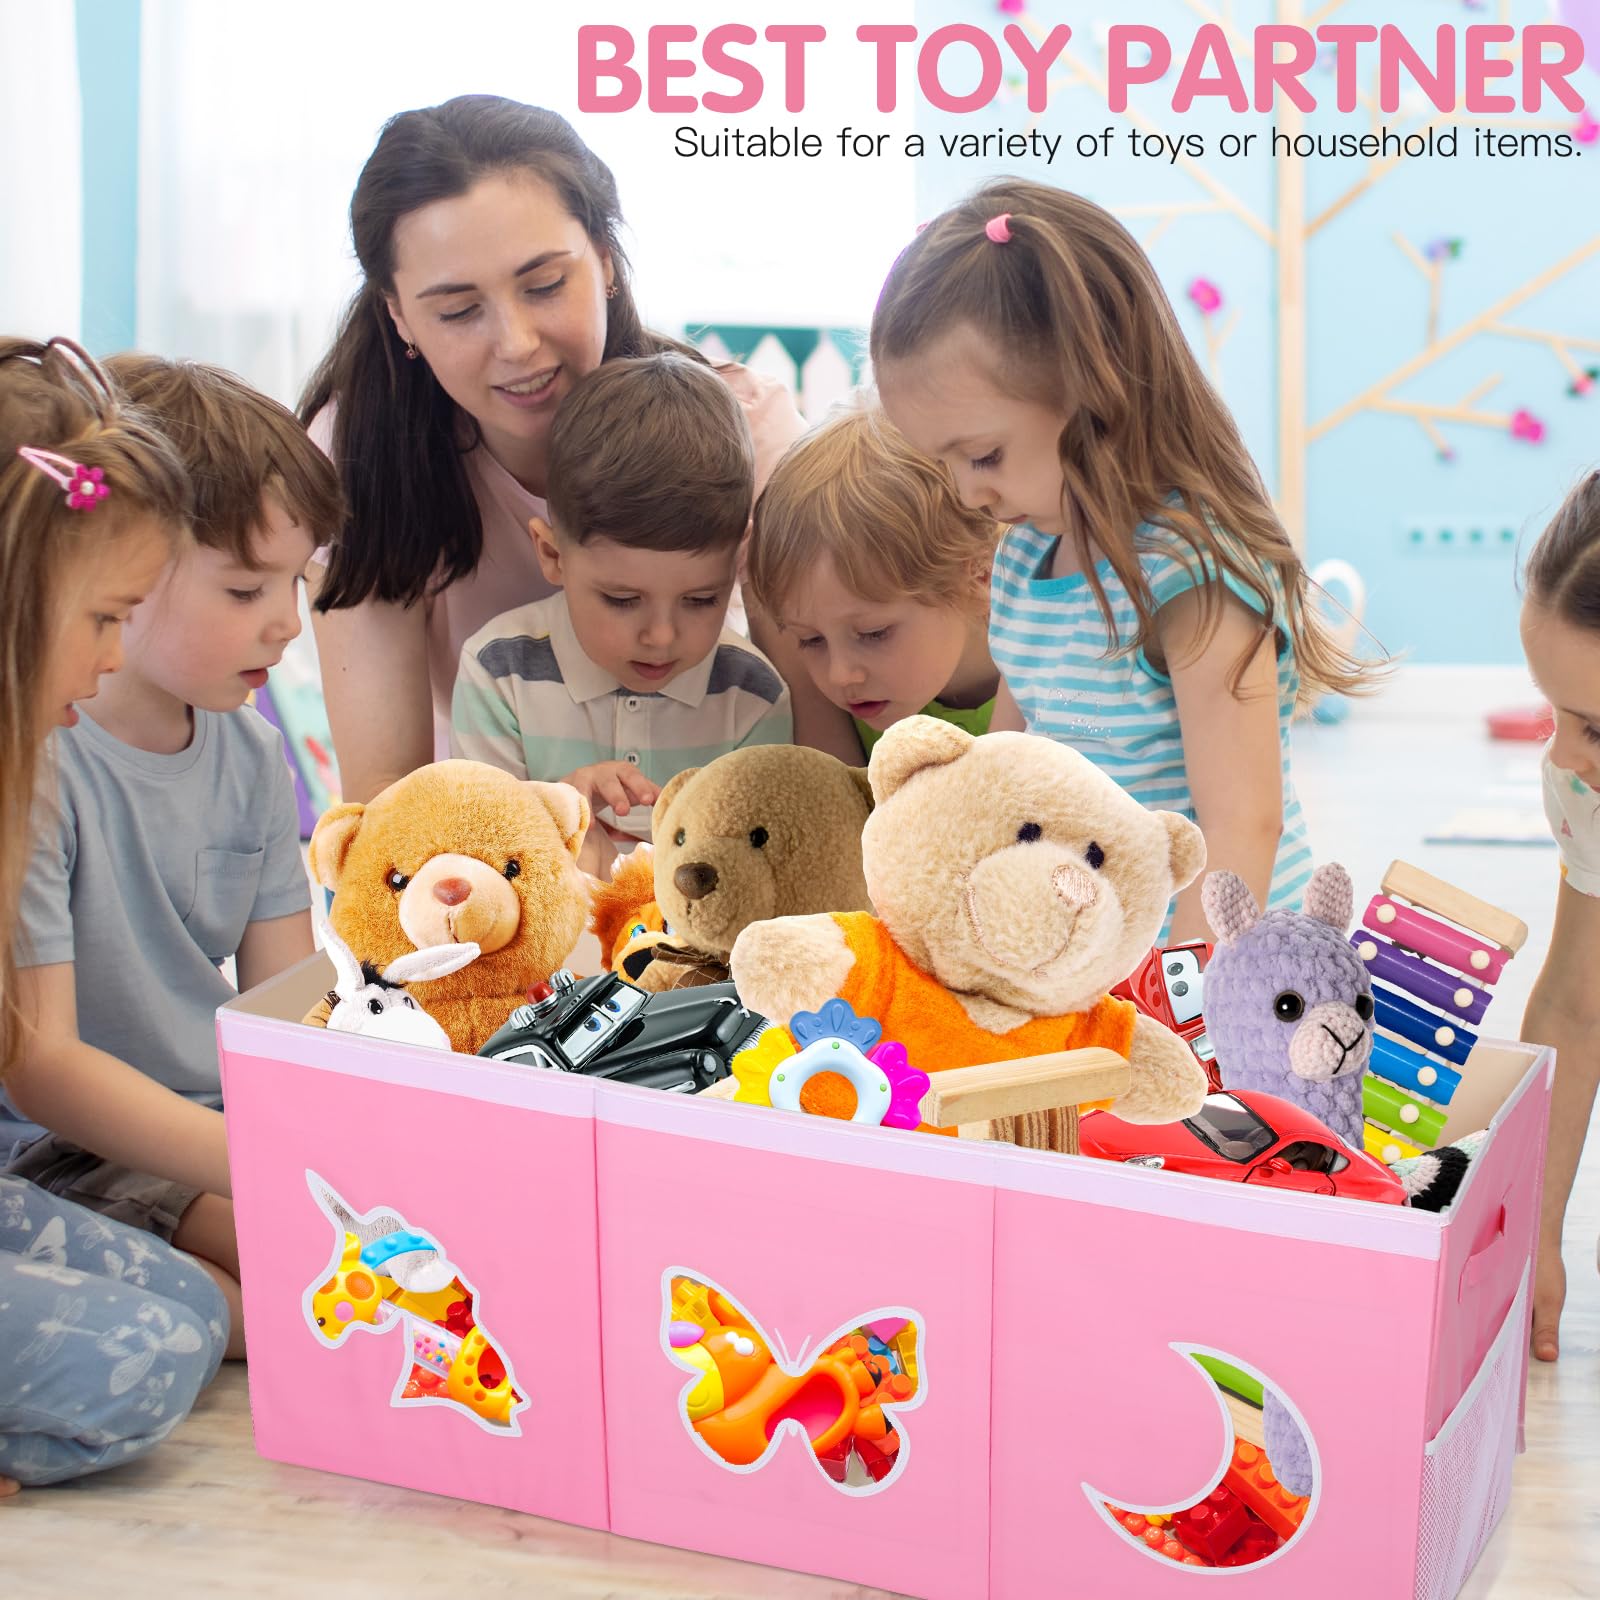 Geetery Extra Large Toy Chest Storage Box Girls Toy Storage Chest Unicorn Toy Organizer with Lid 40.4 x 14.0 x 16.3'' Collapsible Storage Bin with Handle and Mesh Pocket for Nursery Playroom Bedroom